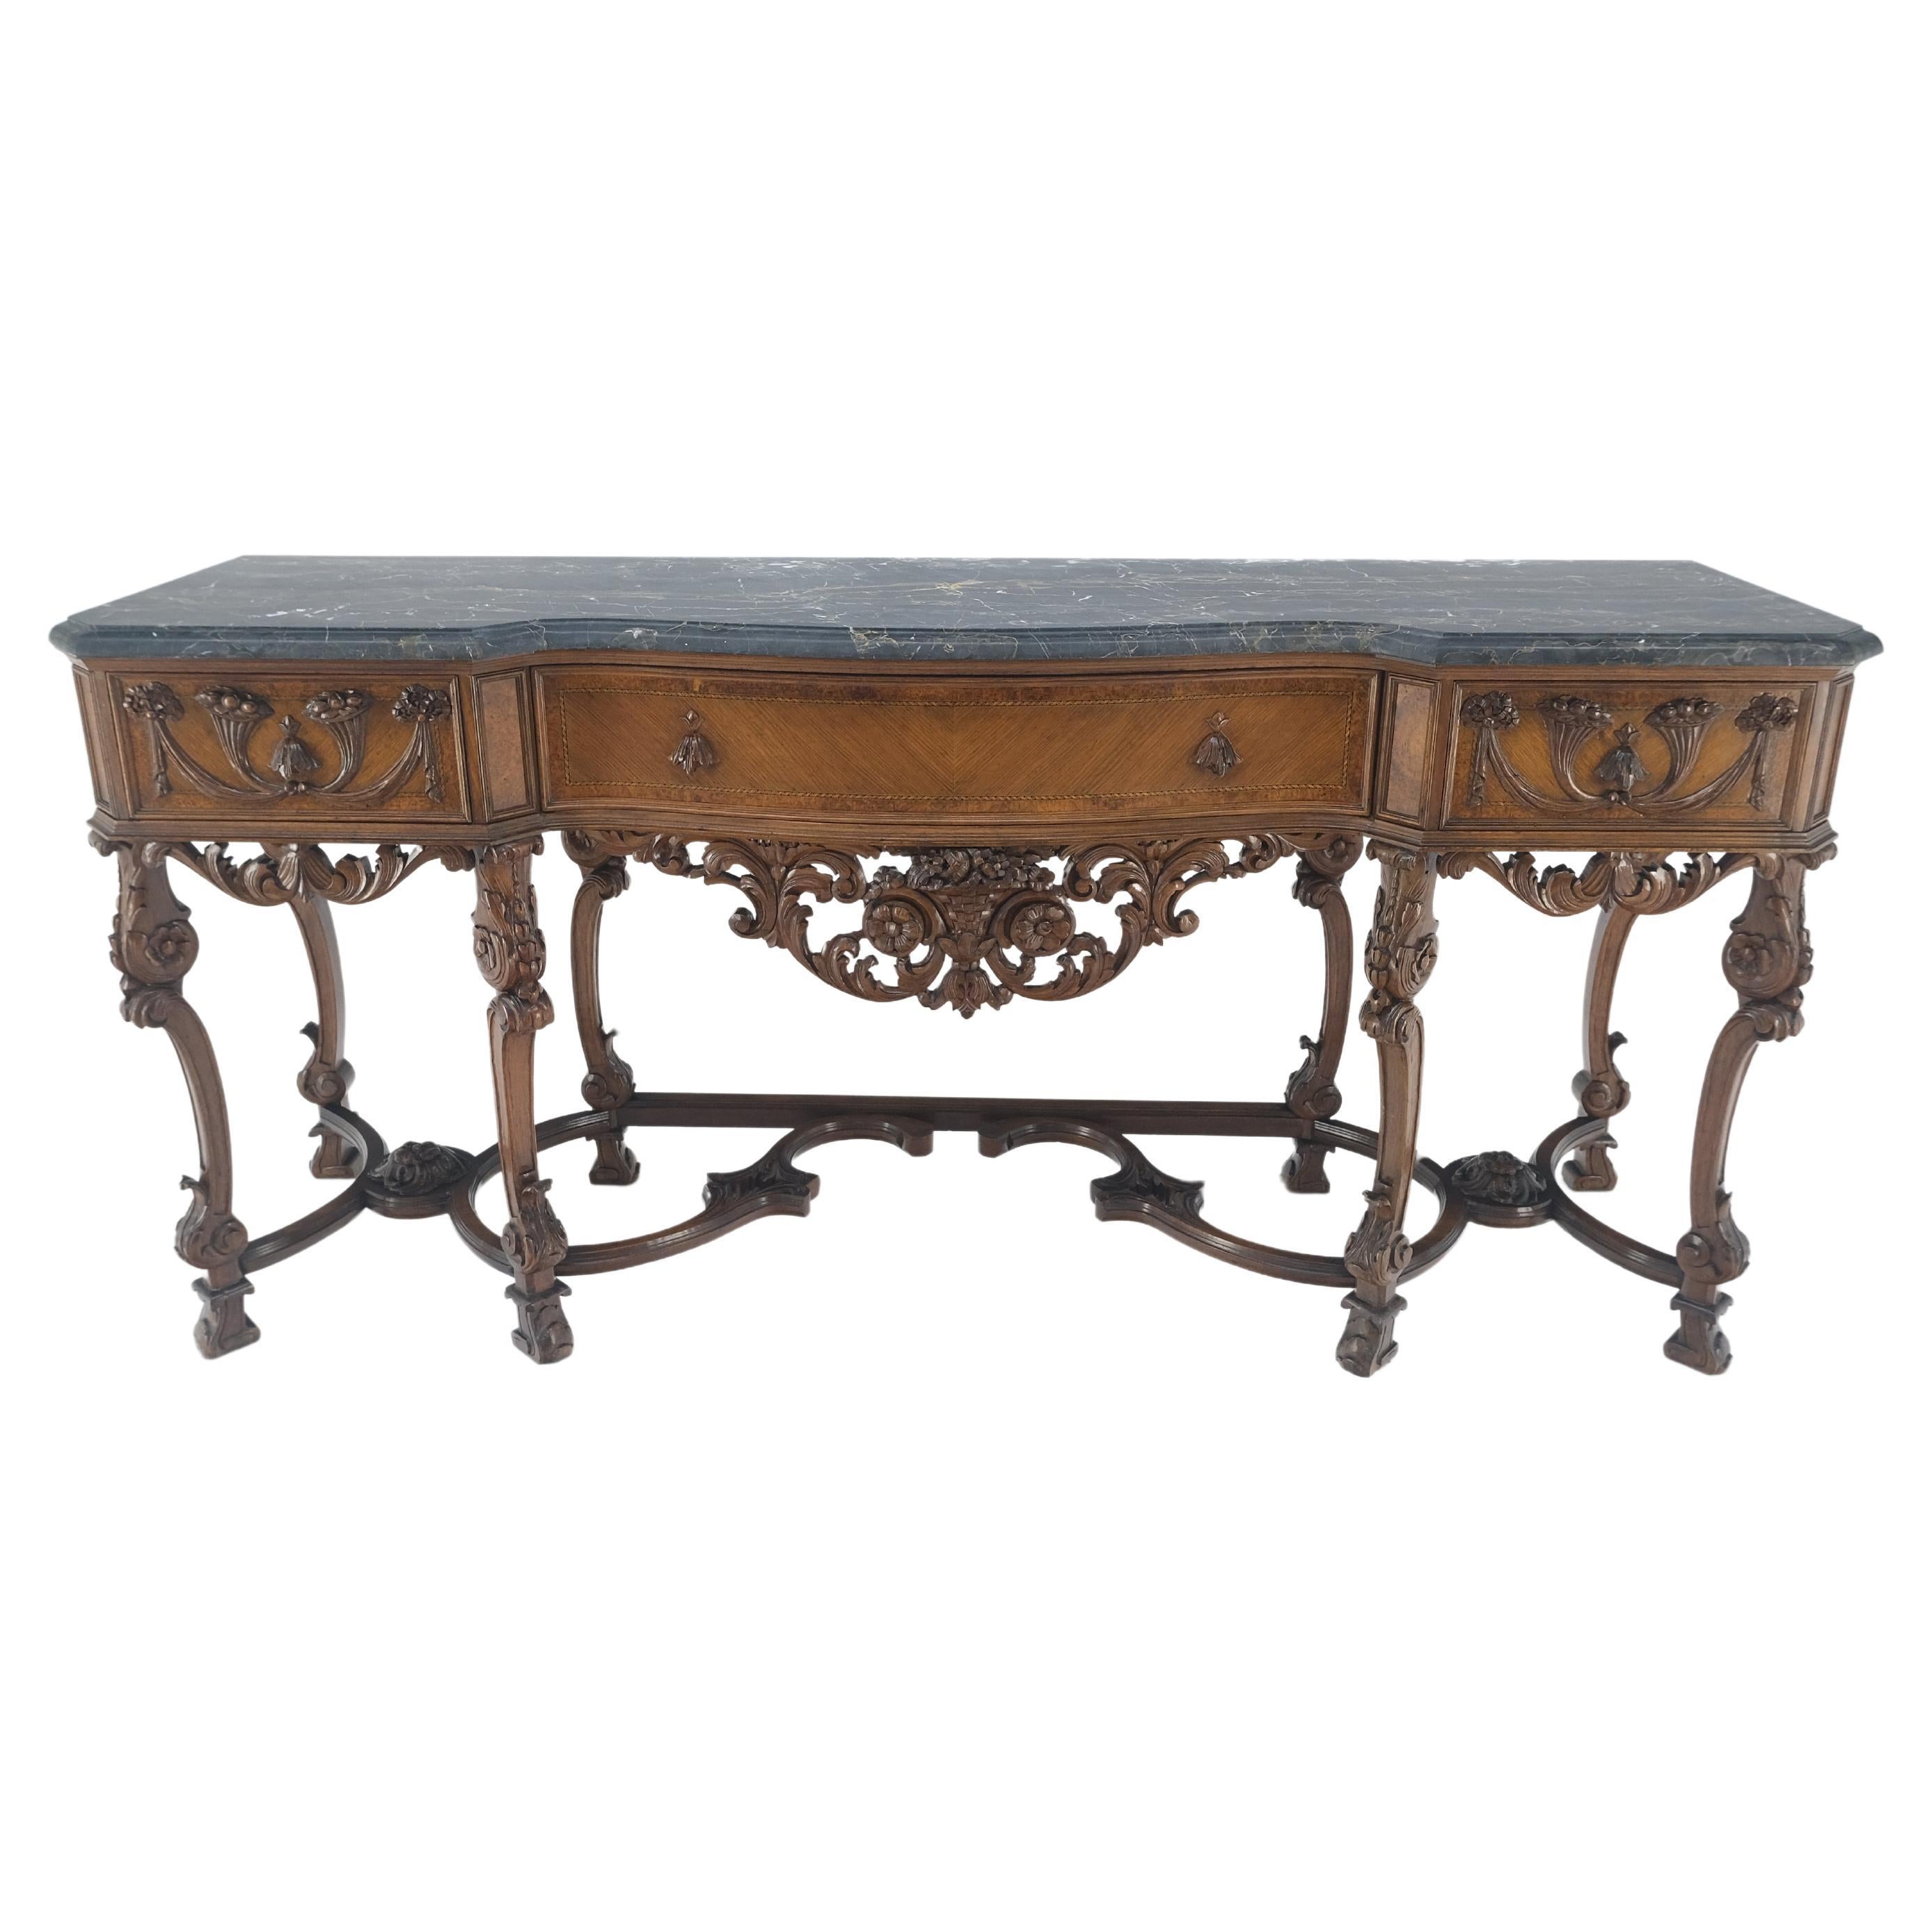 Rococo Revival Antique Dovetailed Inlaid Carved Walnut Marble Top SideBoard Server Buffet MINT! For Sale